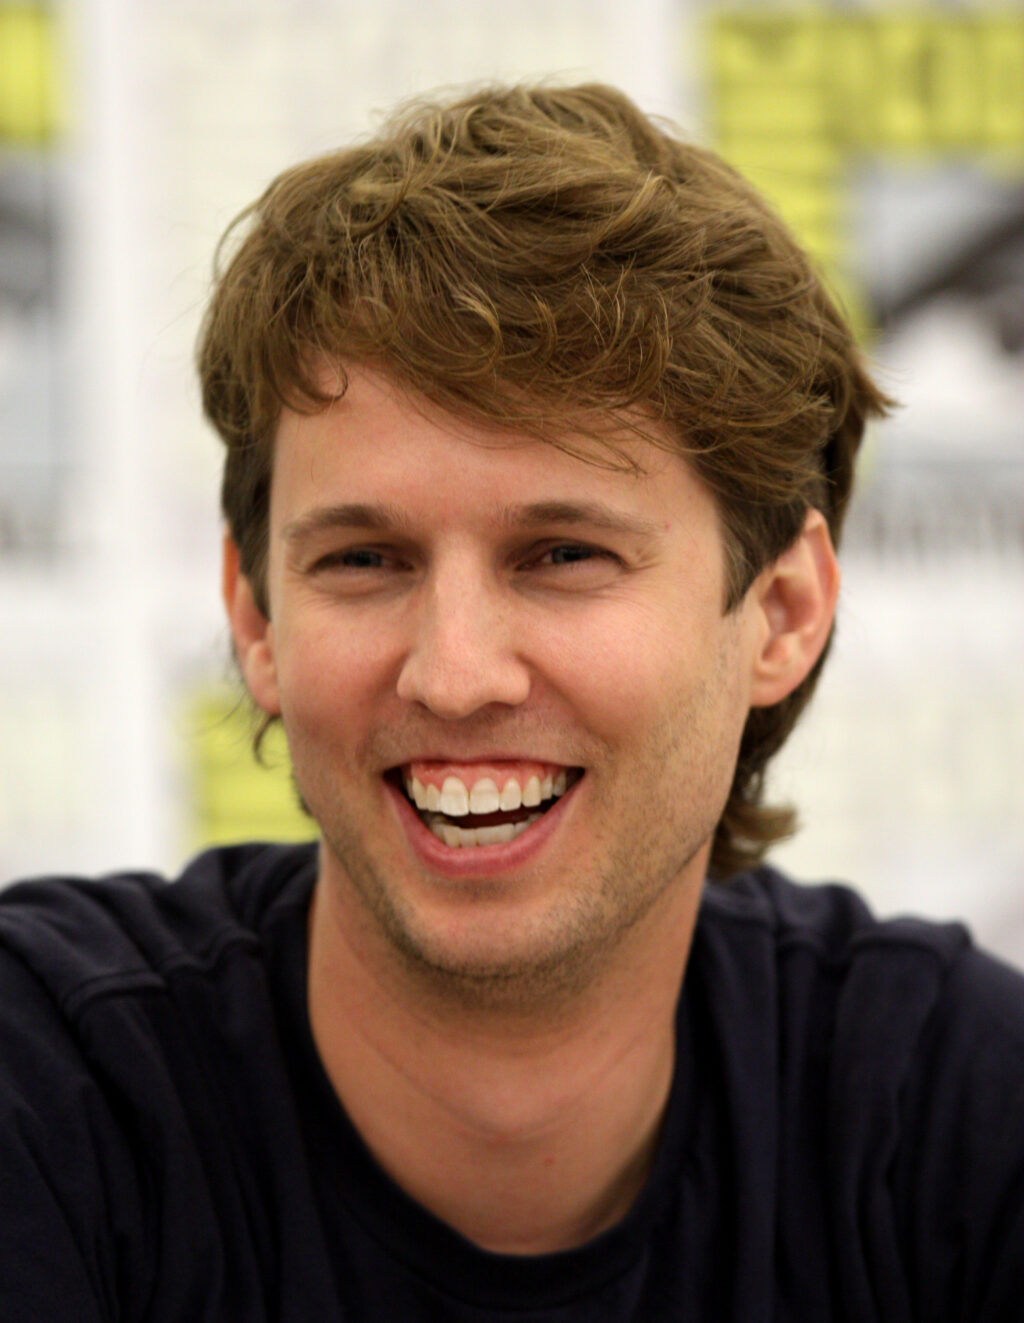 Jon Heder Top 10 Celebrities with a Gummy Smile - 2